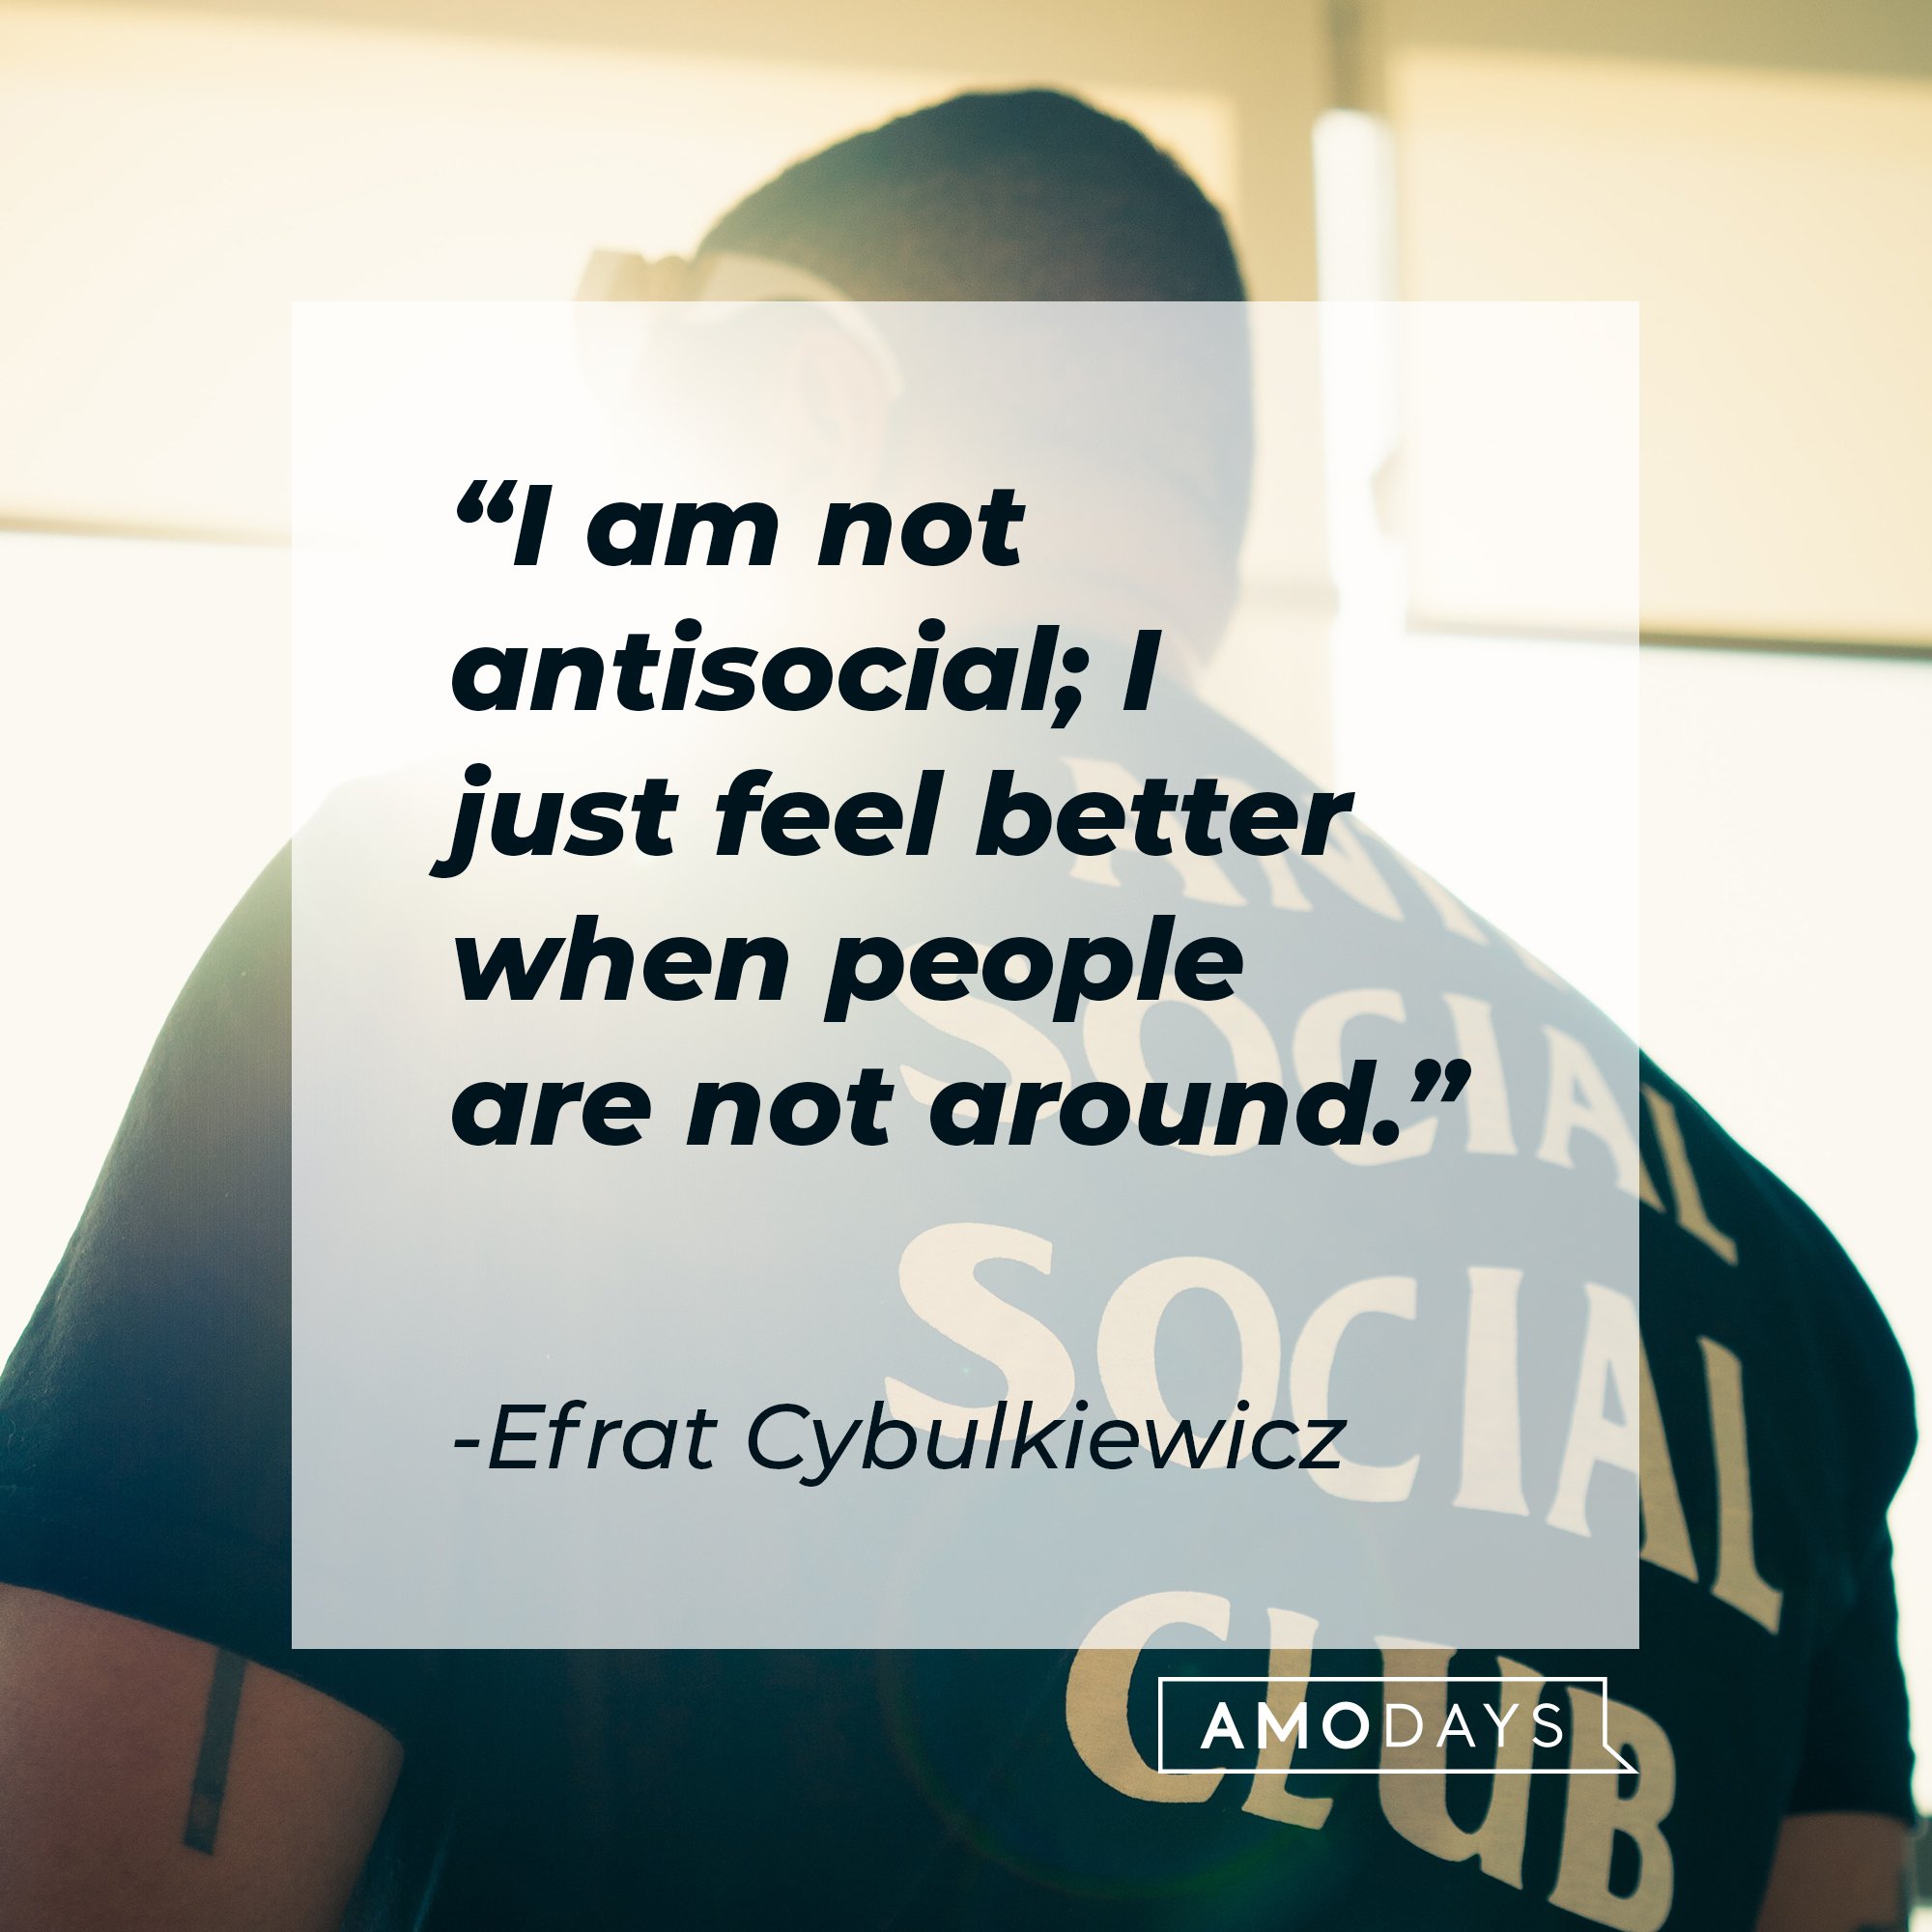 Efrat Cybulkiewicz’ quote: “I am not antisocial; I just feel better when people are not around." |  Image: AmoDays